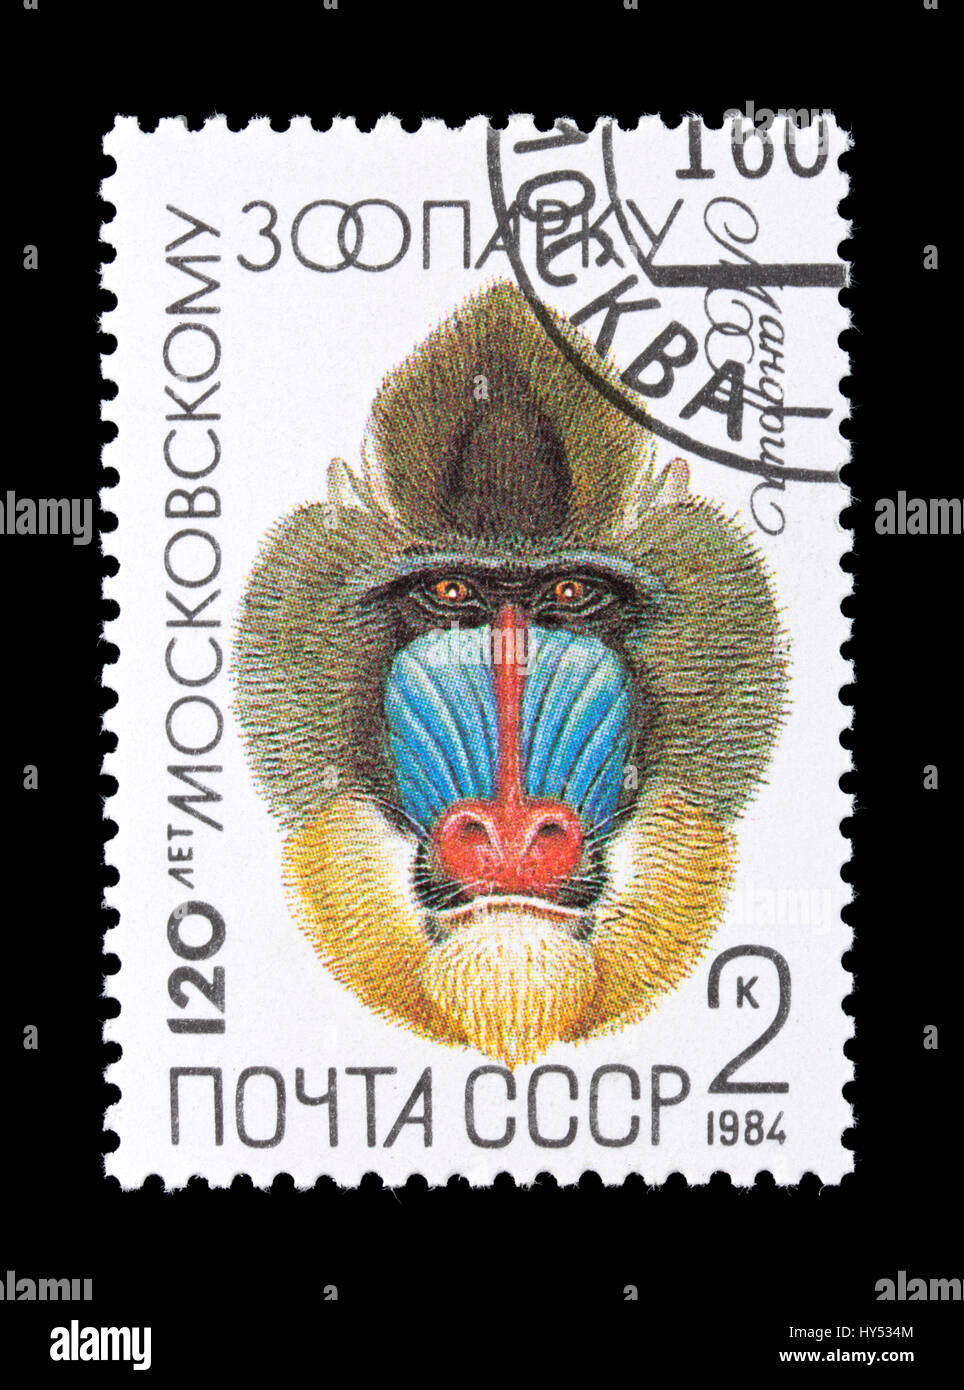 Postage stamp from the Soviet Union depicting a mandrill (Mandrillus sphinx) Stock Photo